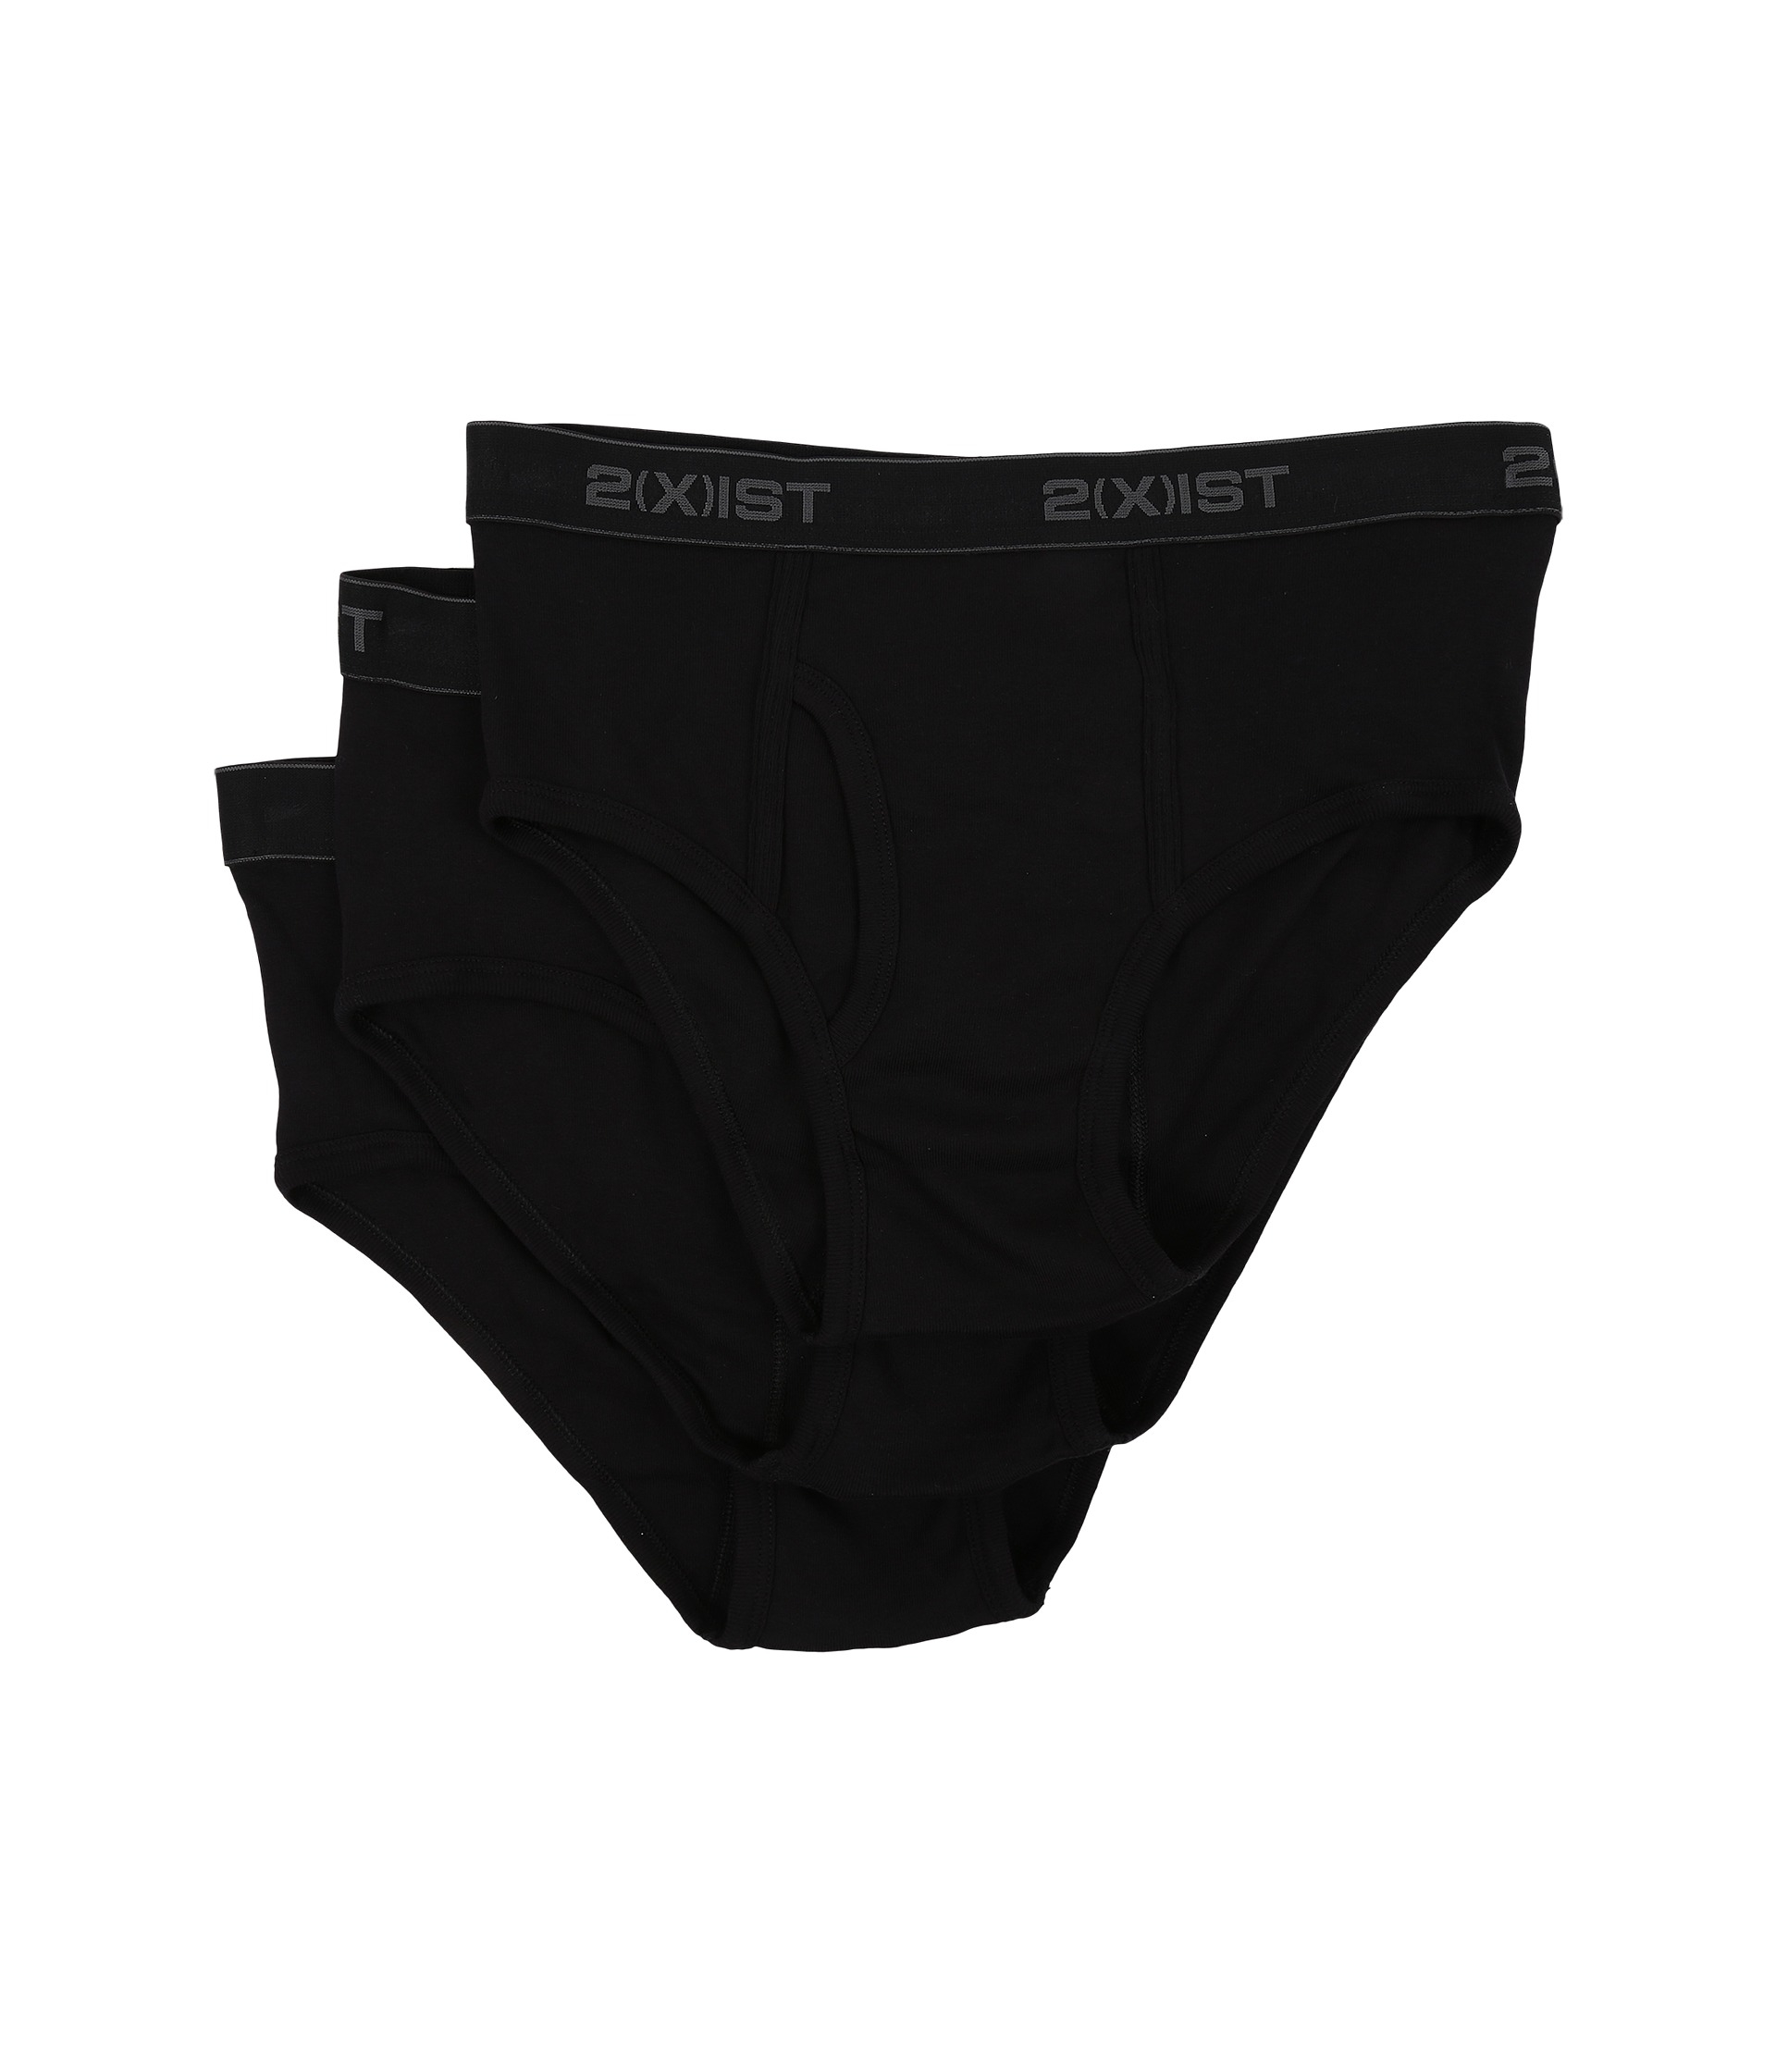 Lyst - 2xist 3-pack Essential Fly Front Brief in Black for Men